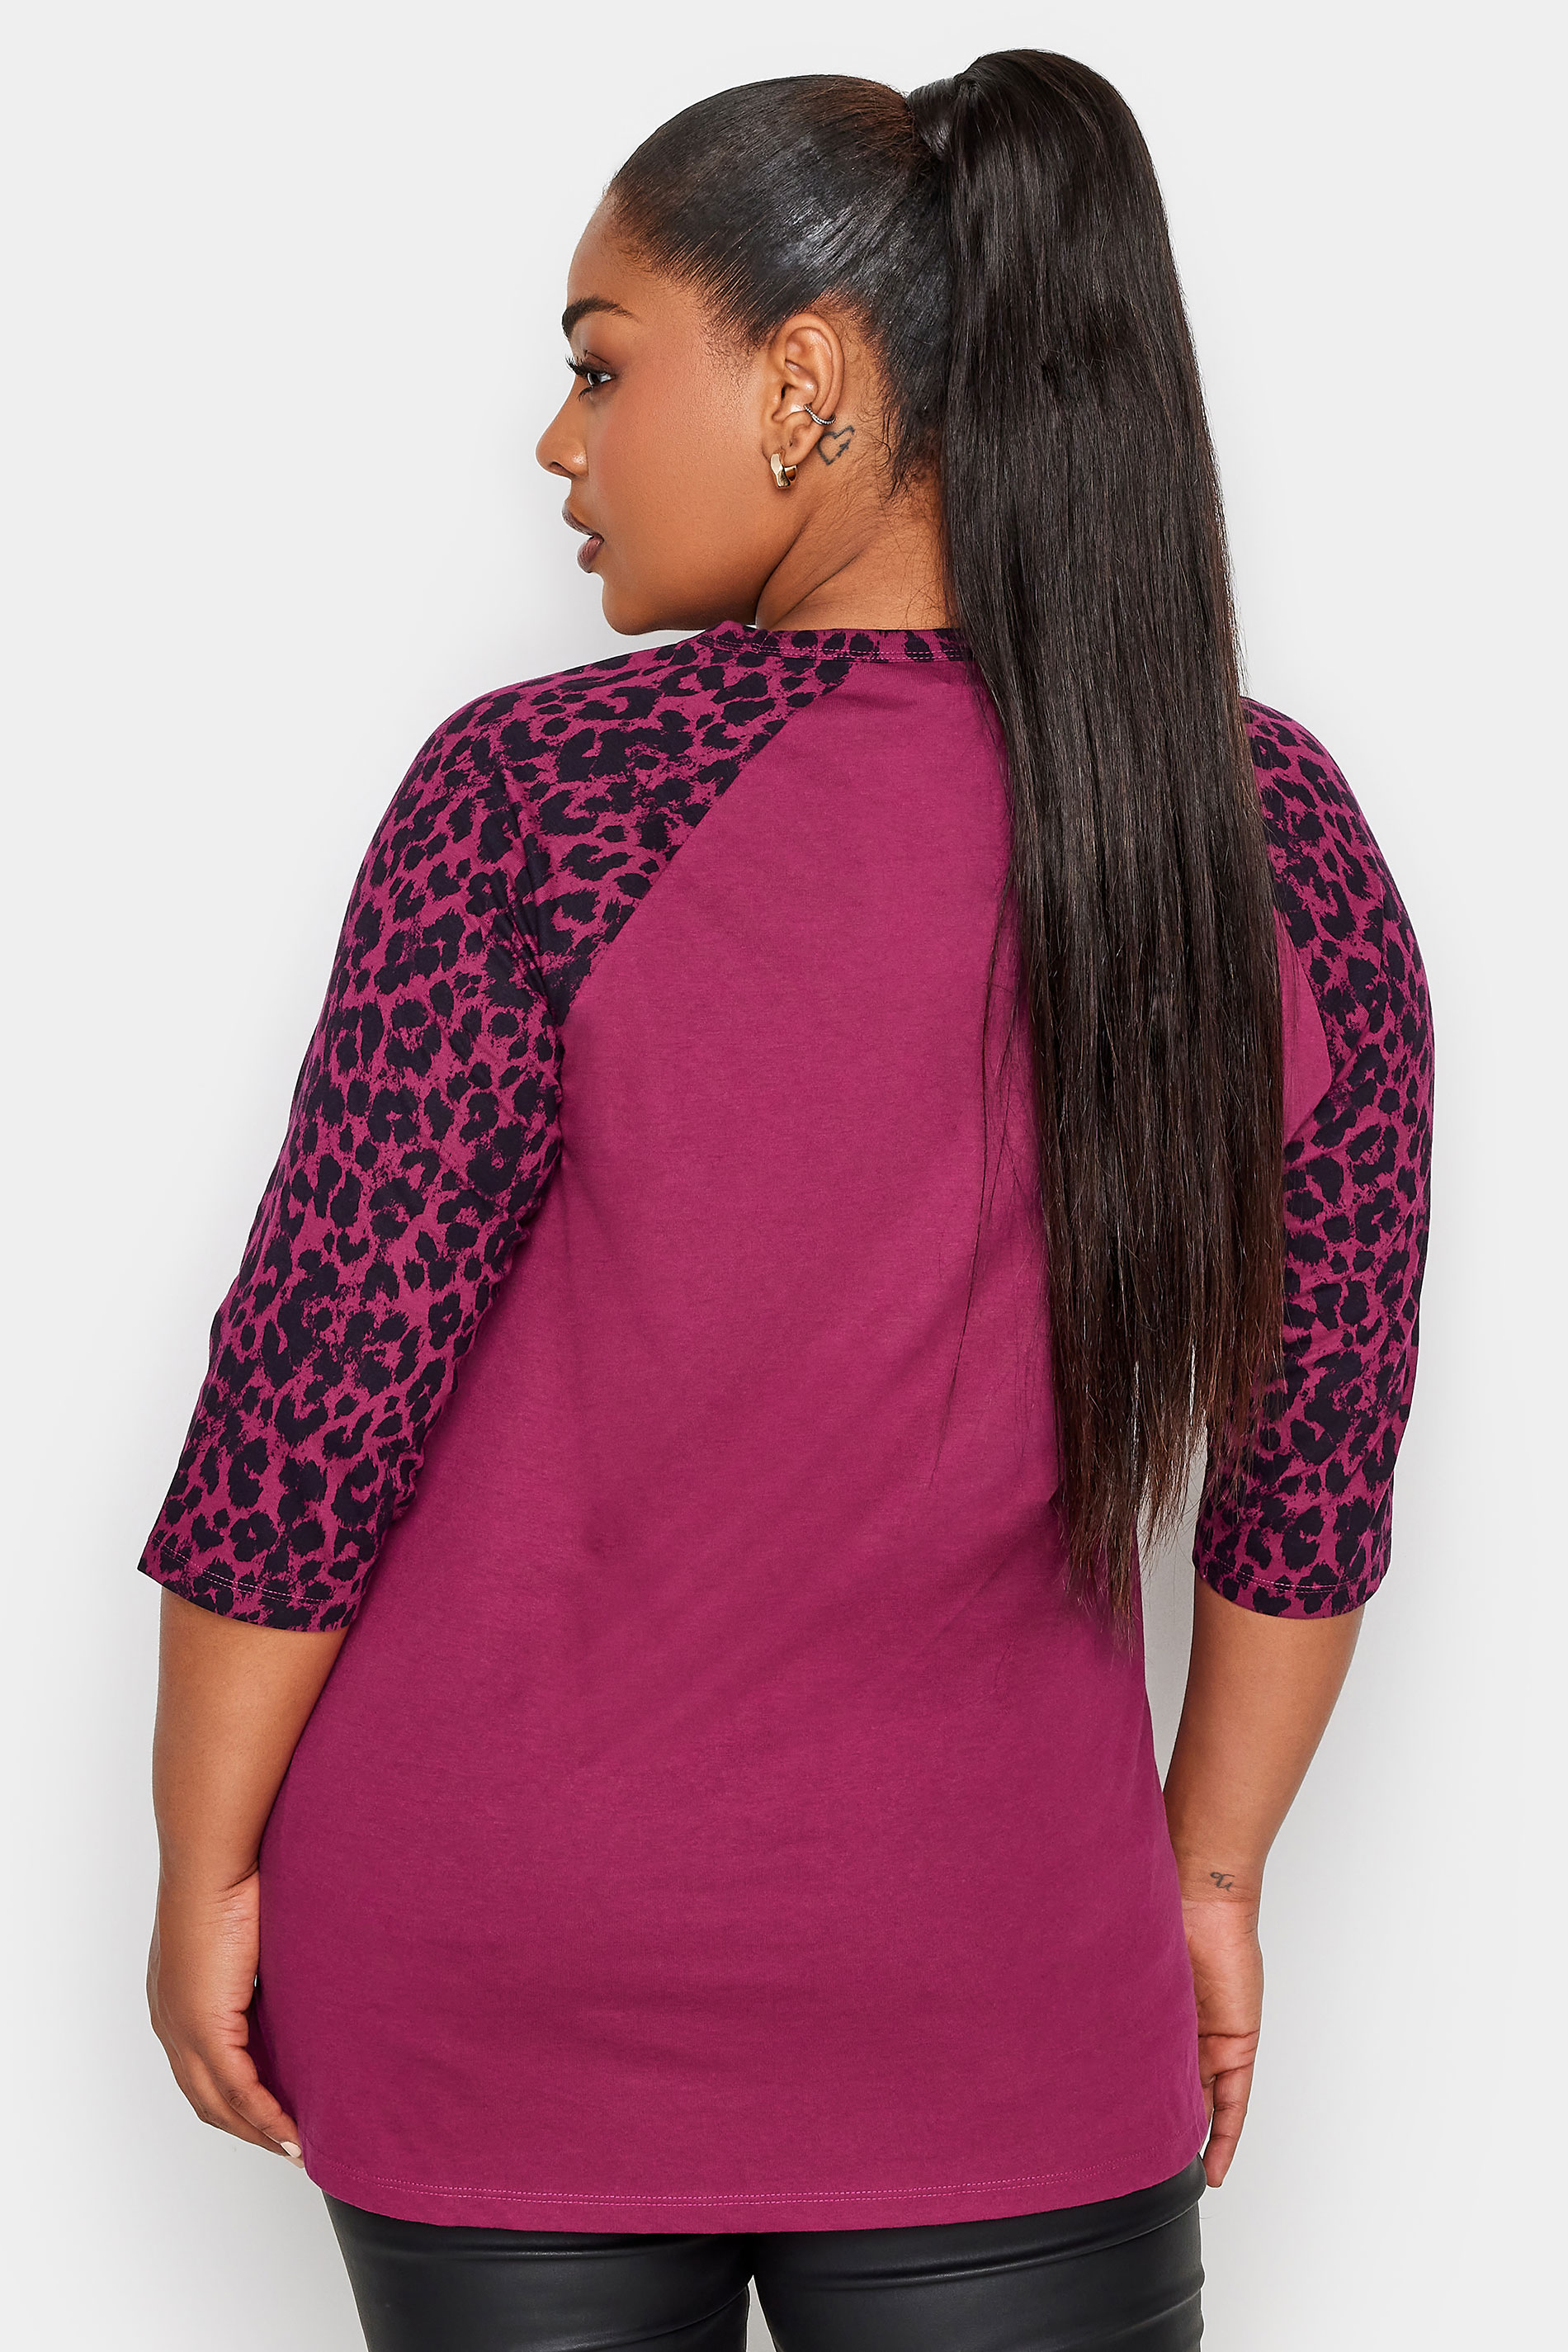 YOURS Plus Size Pink Leopard Print Lace Up Eyelet Top | Yours Clothing 3